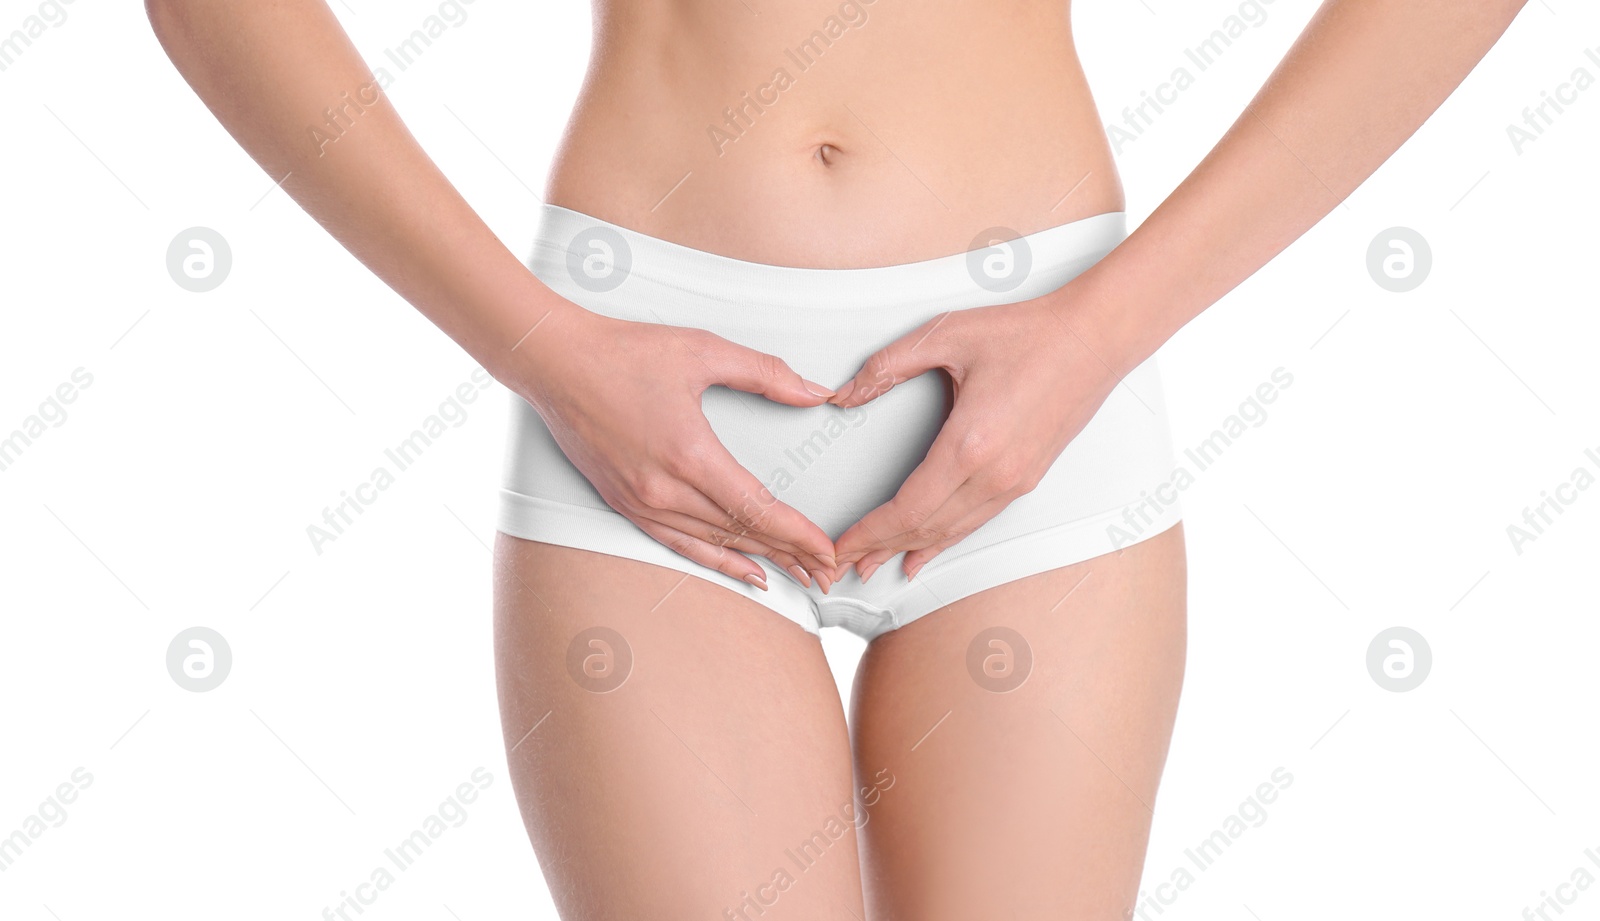 Photo of Young woman making heart symbol with hands near underwear on white background. Gynecology